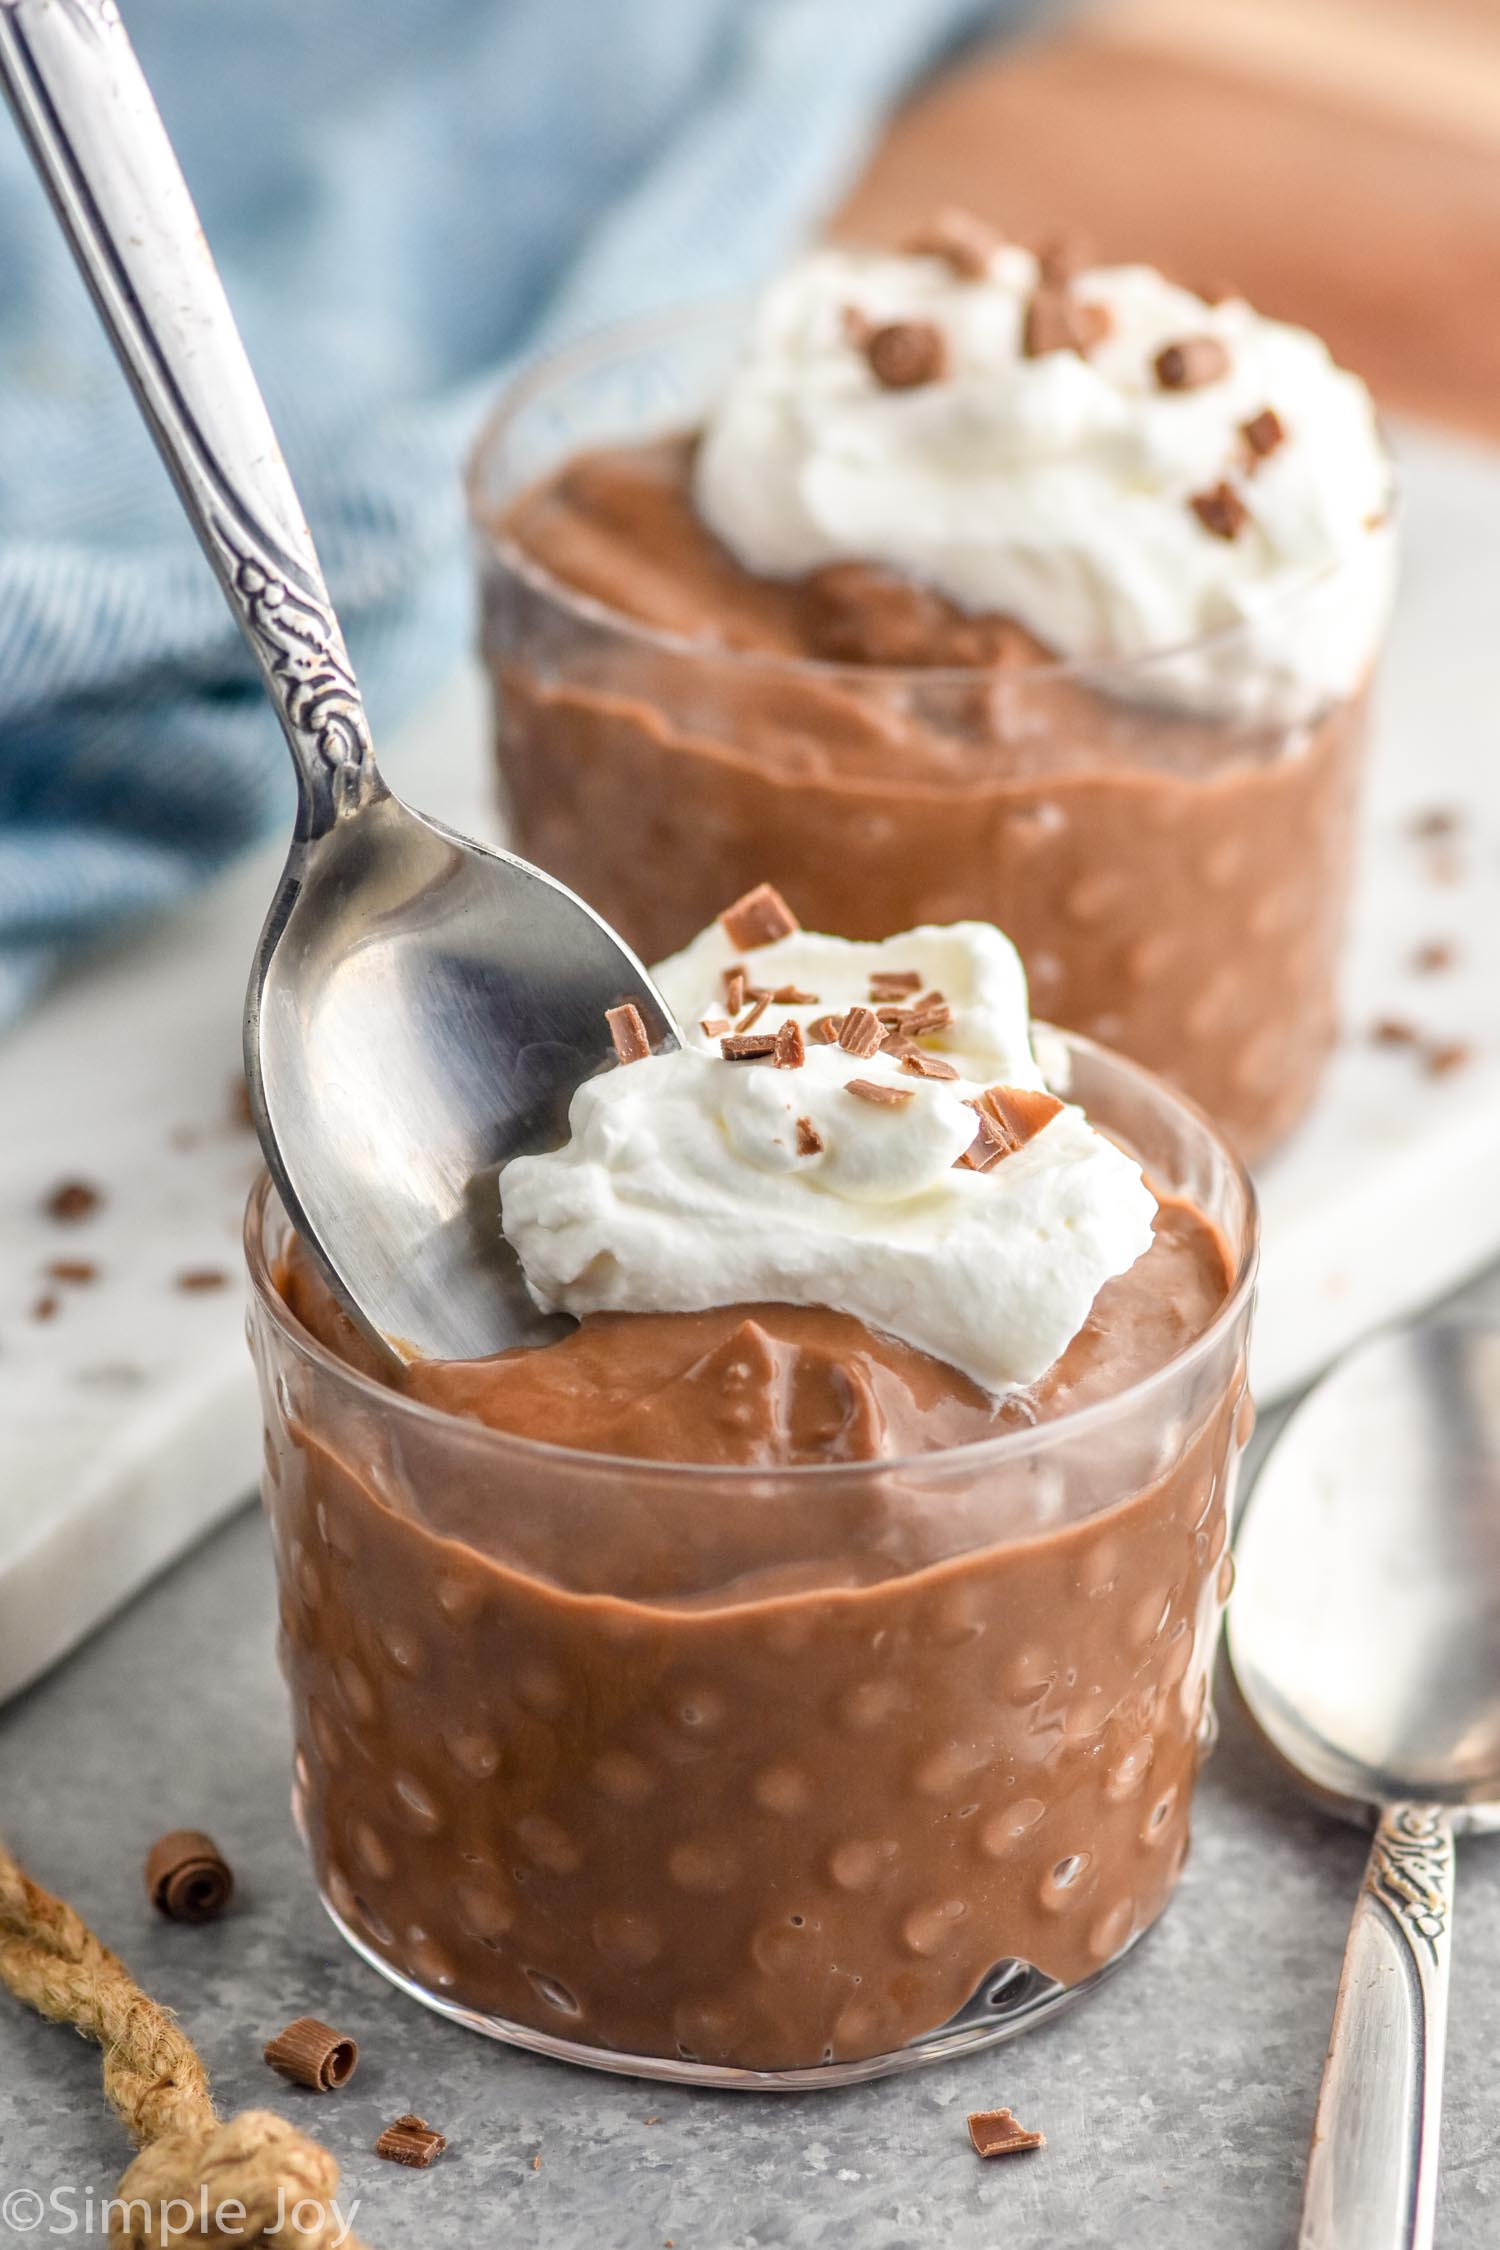 Two cups of Chocolate Pudding garnished with whipped cream and chocolate shavings. Spoon in front cup and another spoon beside